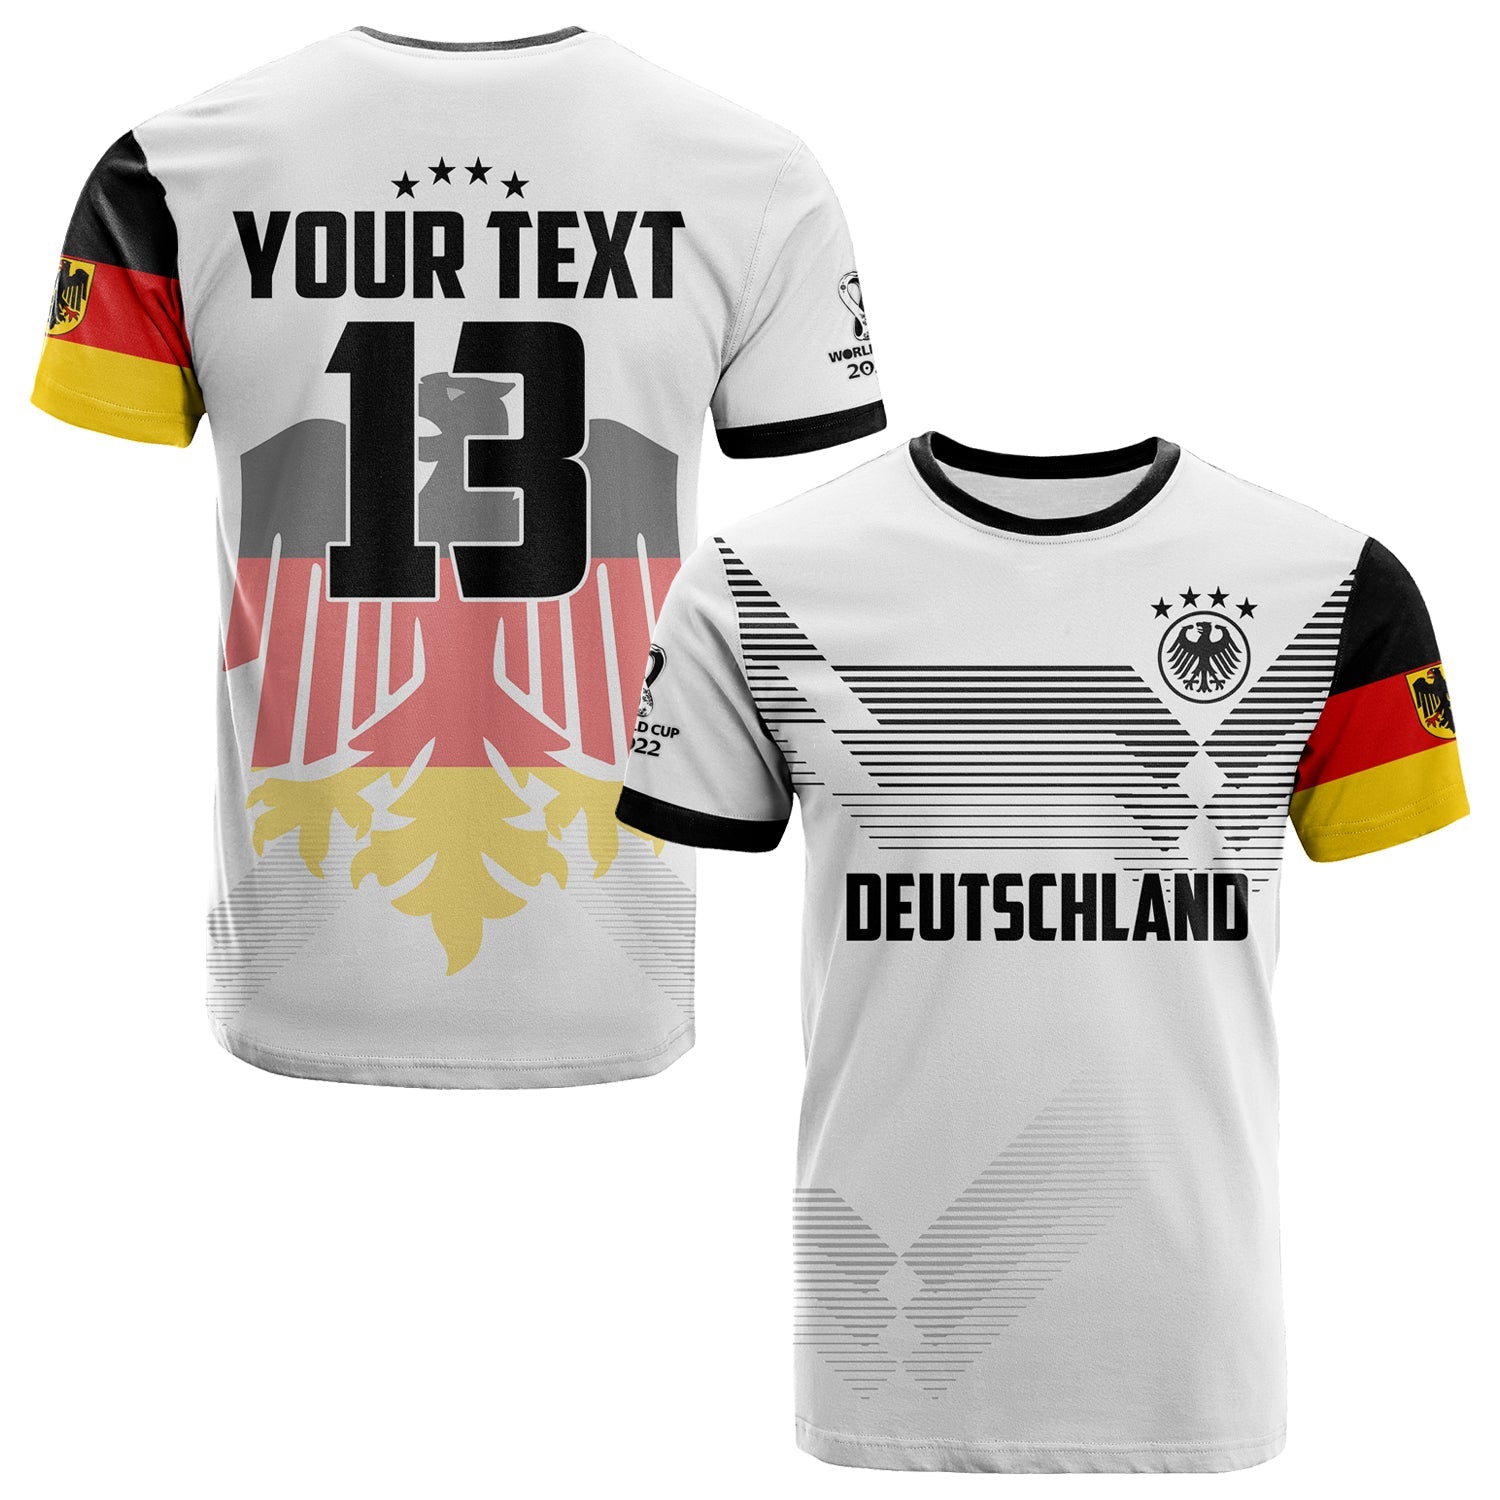 custom-text-and-number-germany-football-t-shirt-come-on-nationalelf-soccer-deutschland-champions-wolrd-cup